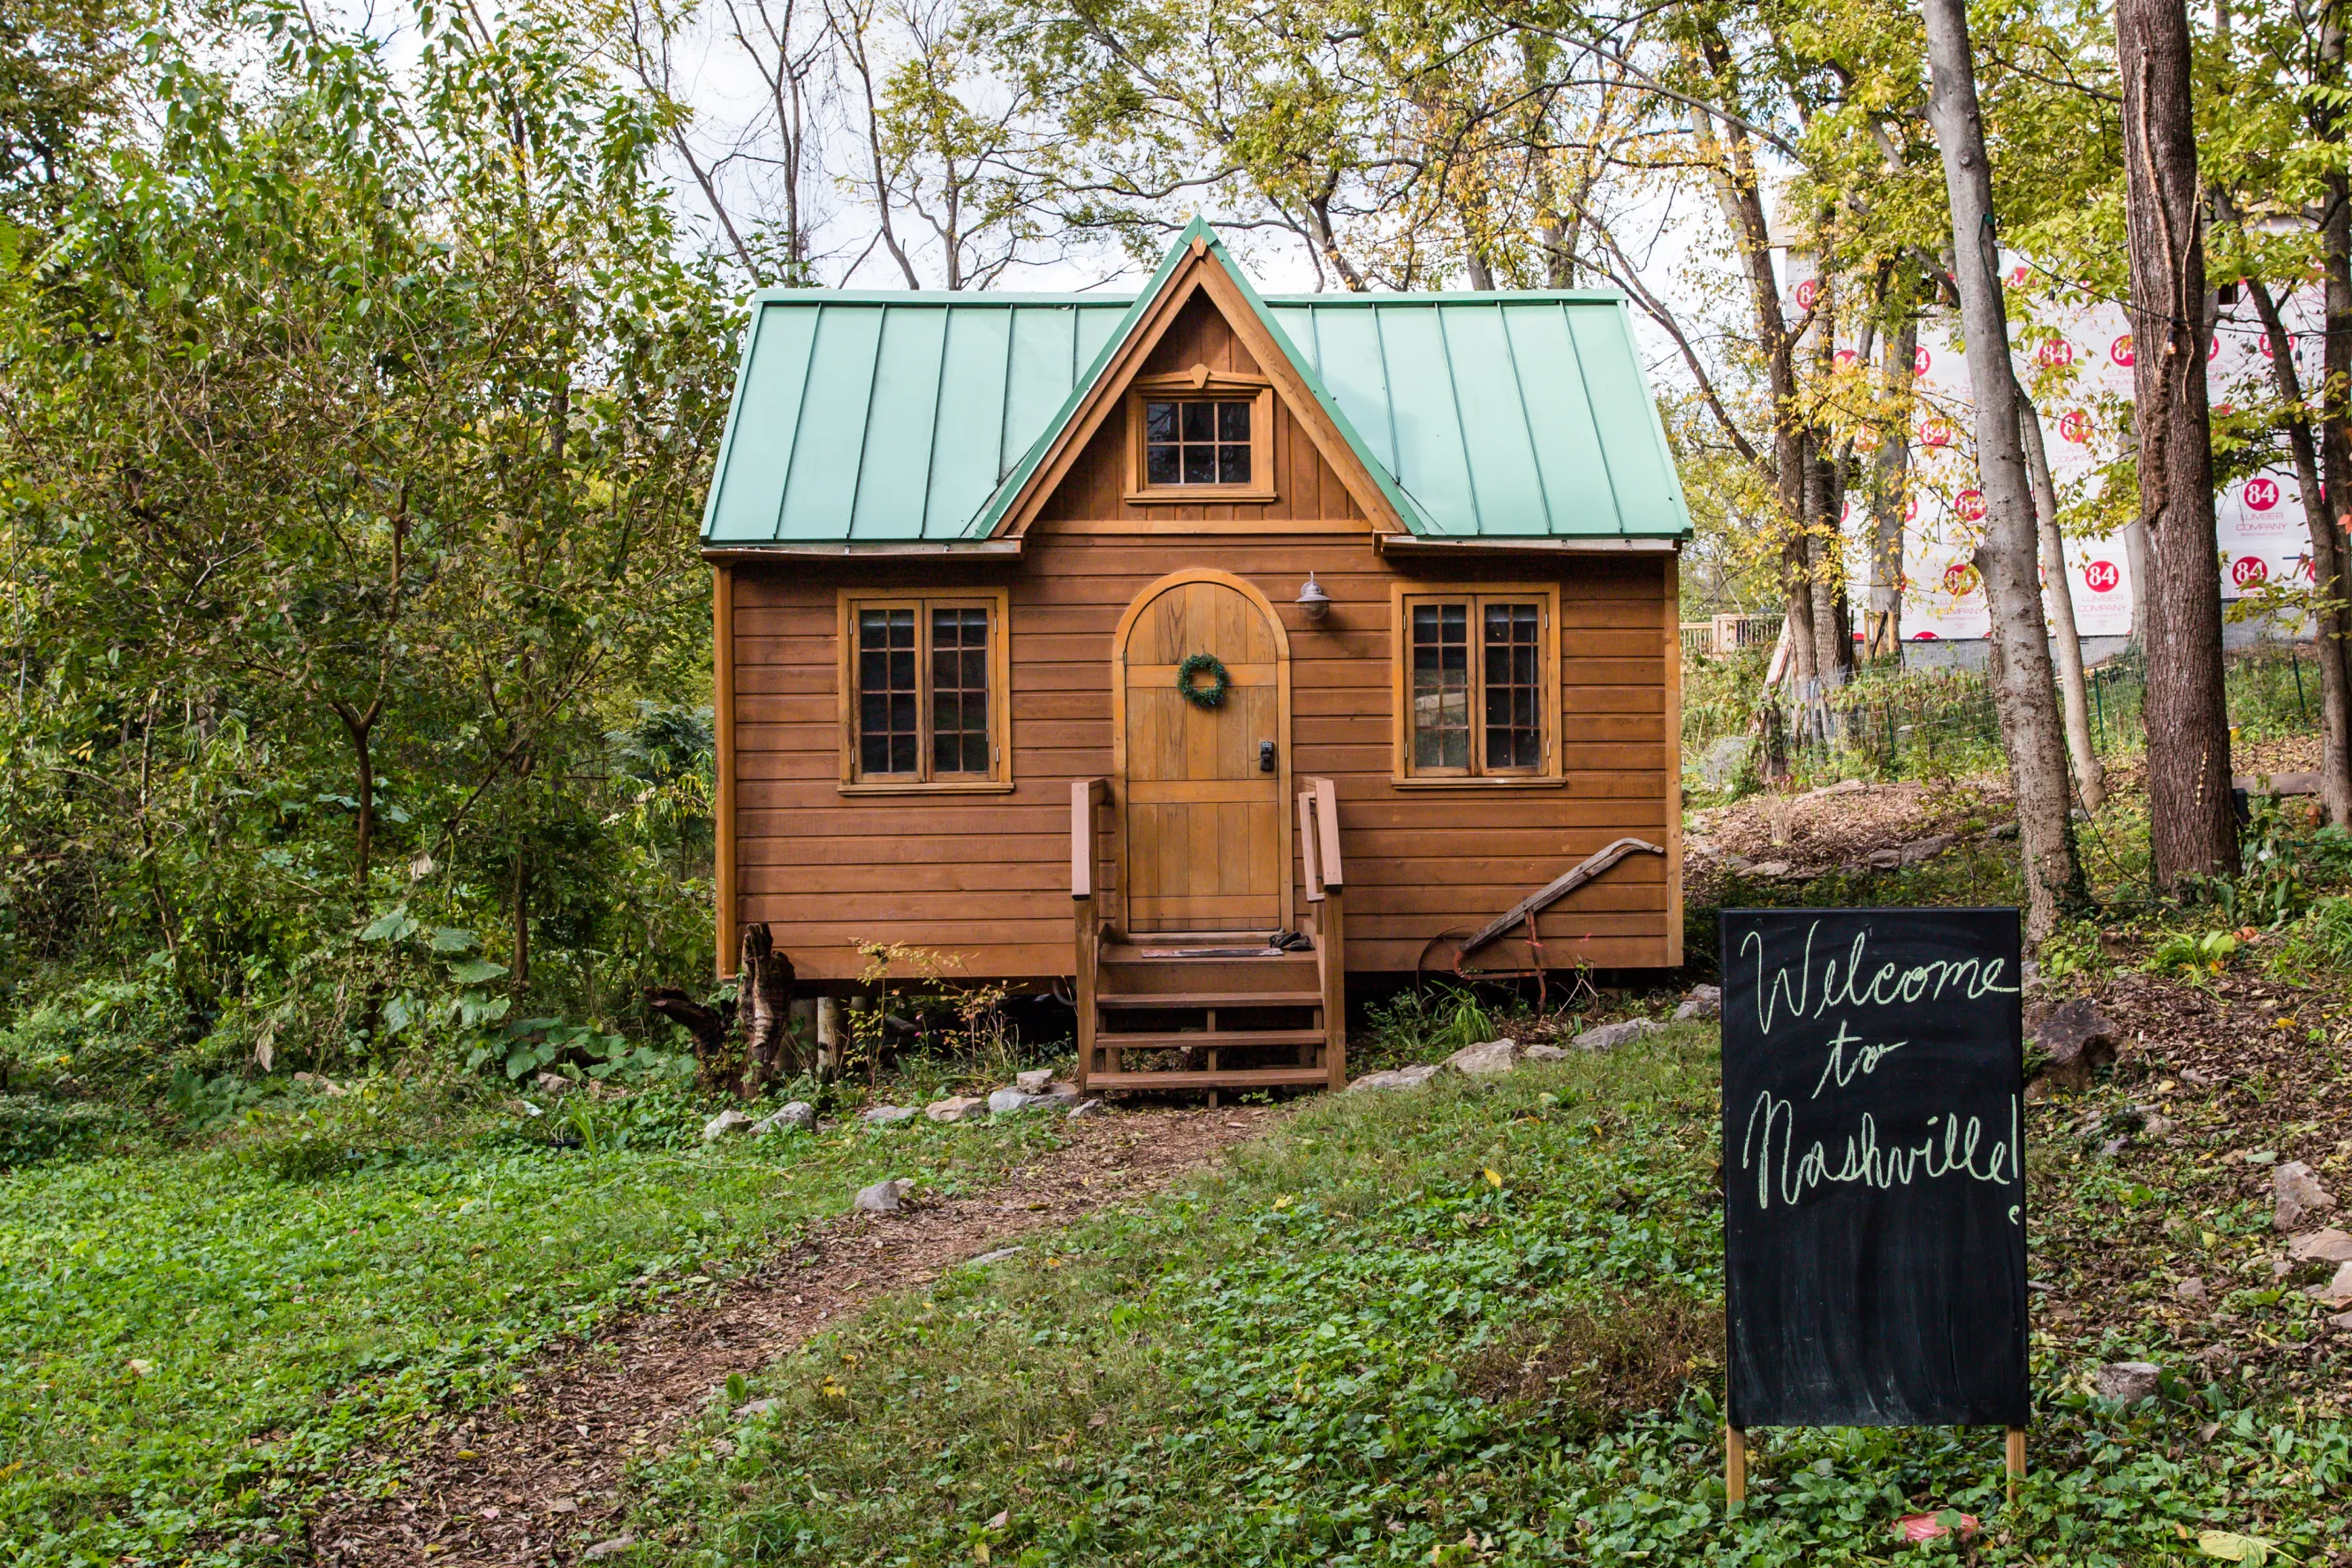 A small brown cabin with a turquoise roof surrounded by trees with a small chalkboard sign in front of the house with the text “Welcome to Nashville”